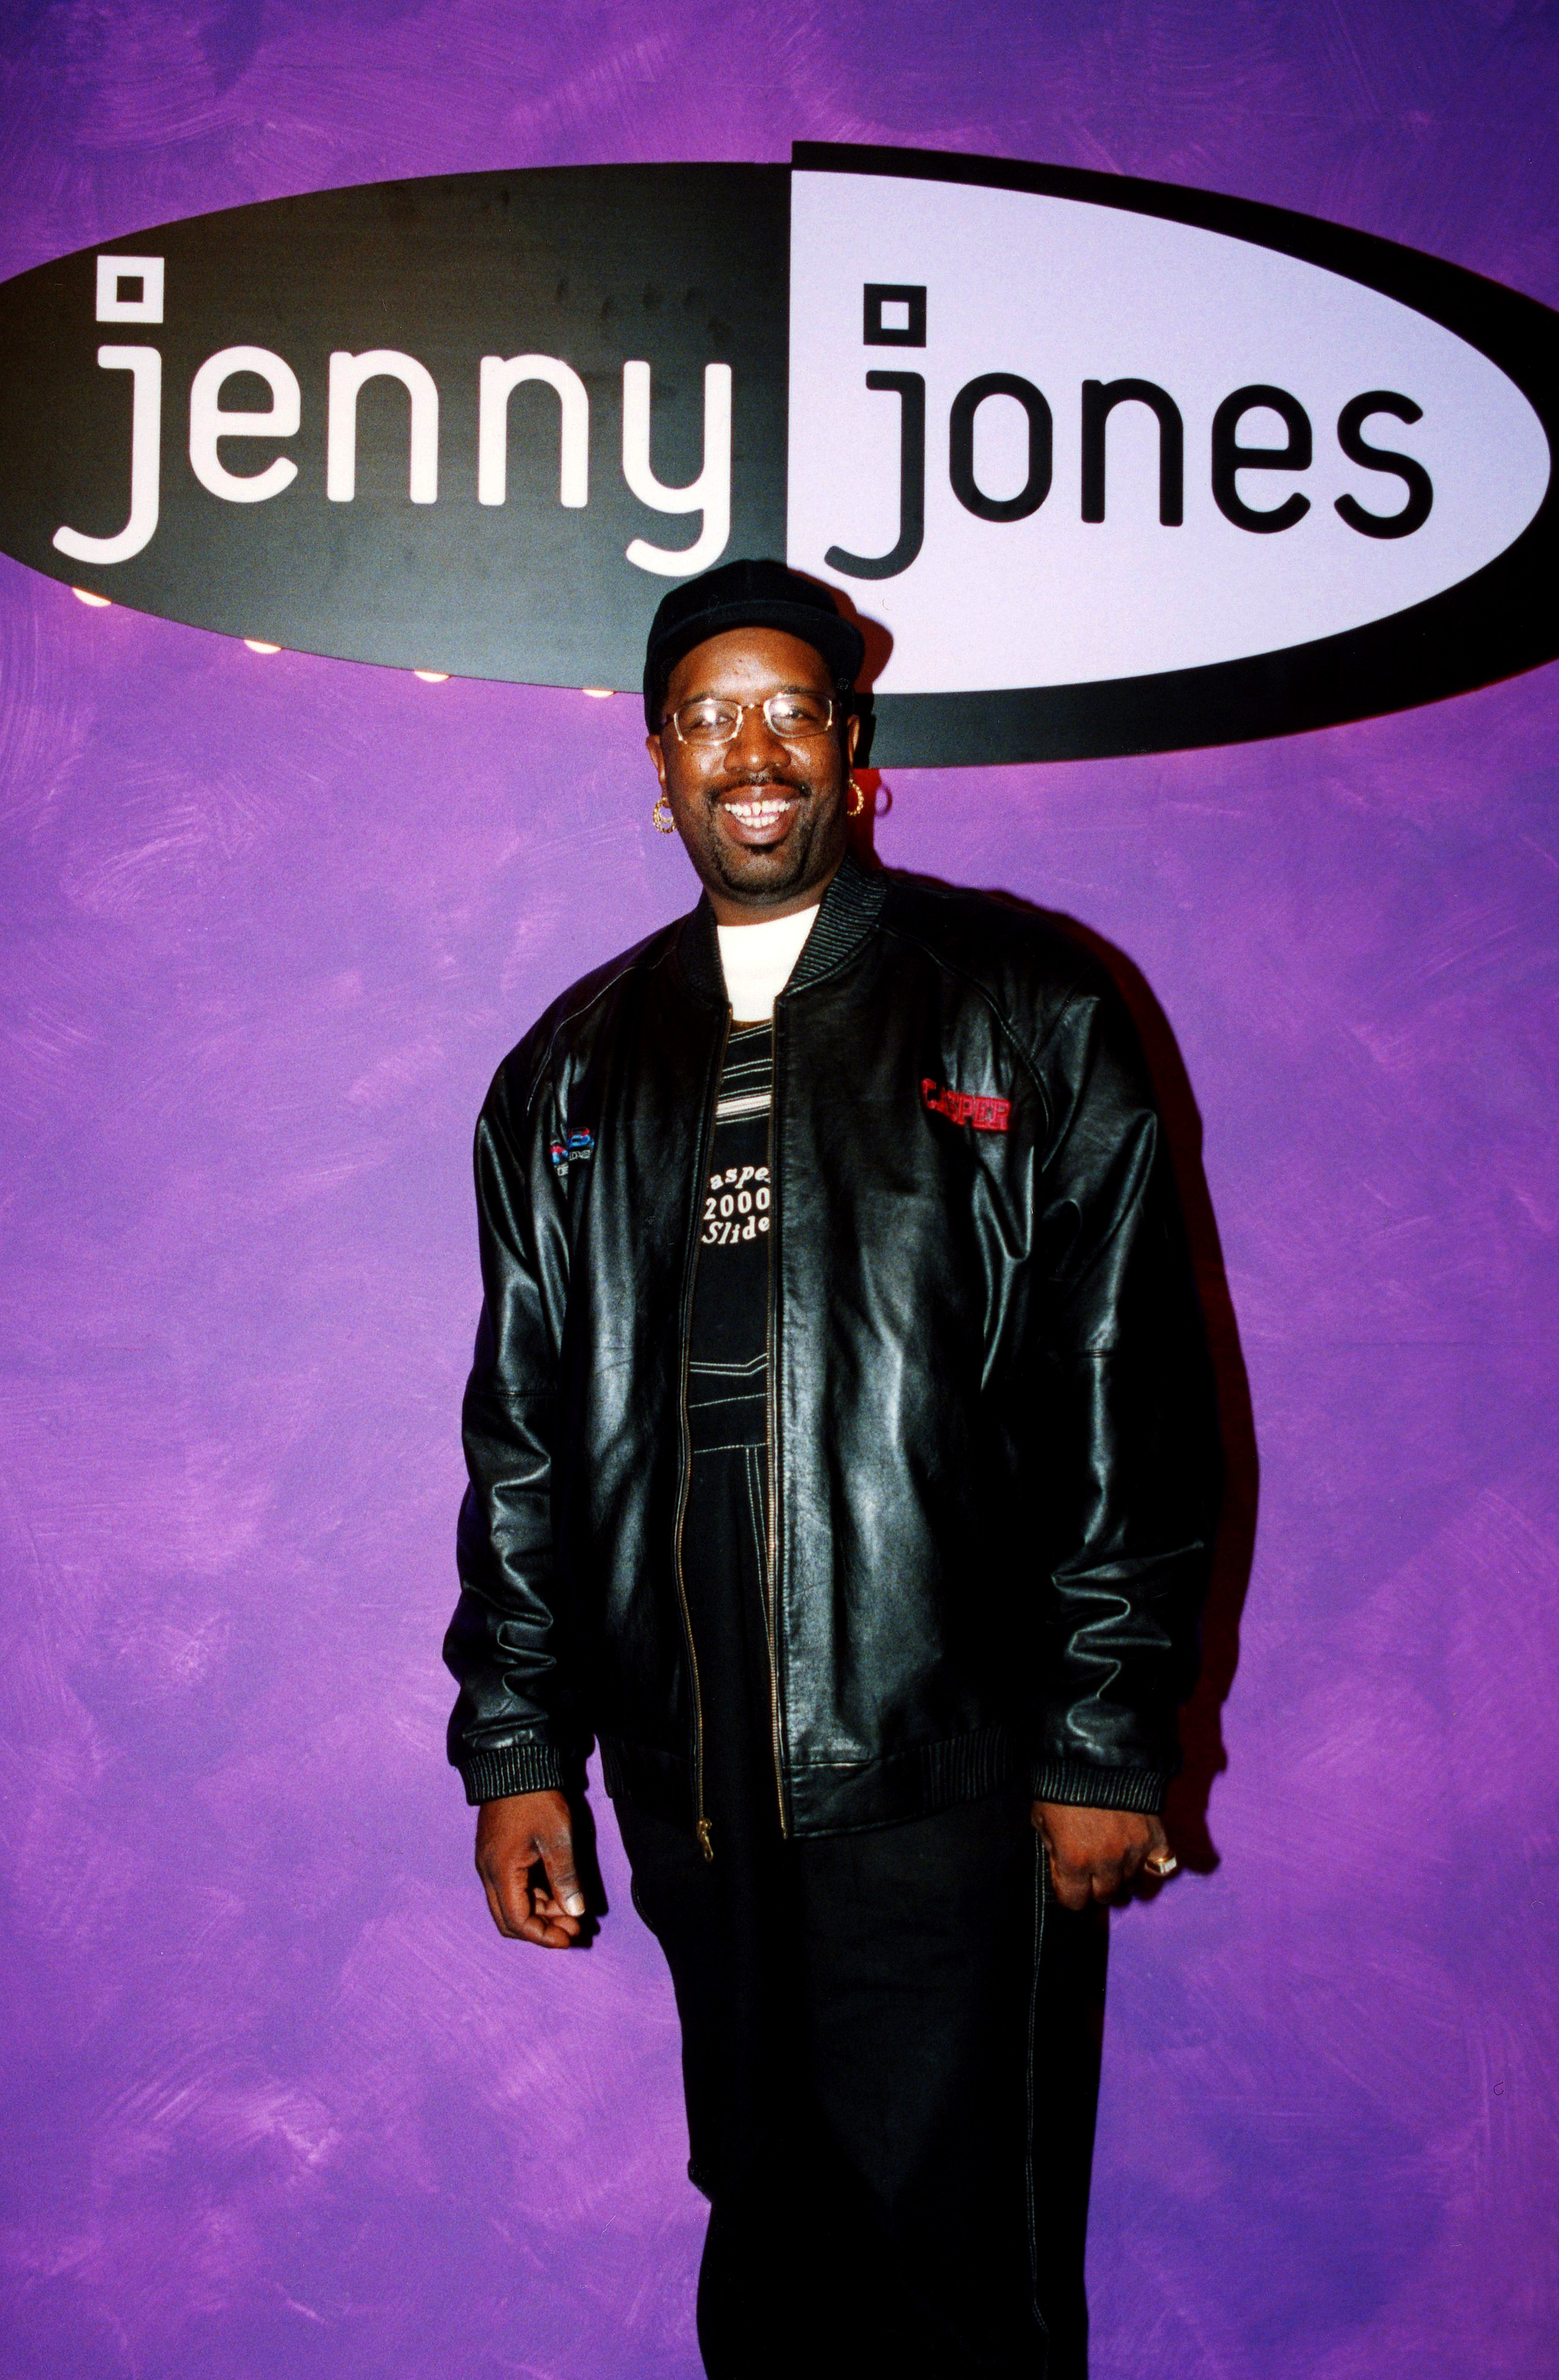 DJ Casper (Wille Perry, Jr.) poses for photos after rehearsals for his performance on "The Jenny Jones Show" in Chicago, Illinois, in September 2000. | Source: Getty Images